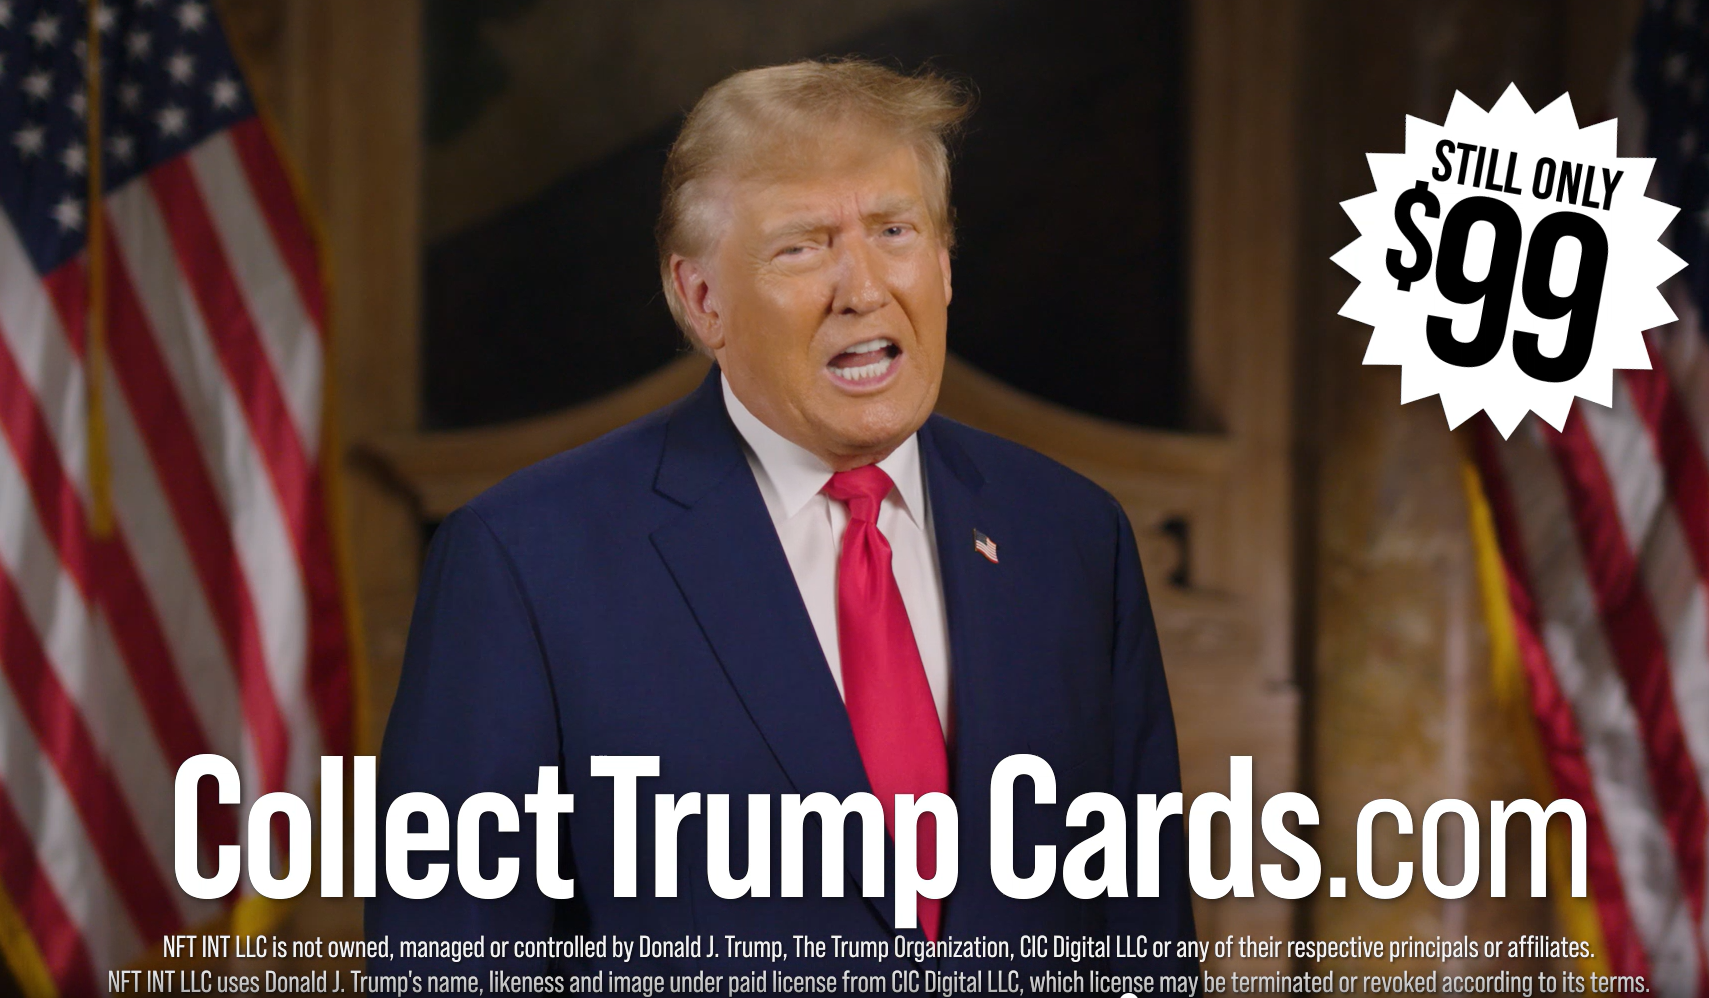 Trump Legal Defense Fund Raises Just $1.6 Million in 6 Months as Former President Leans Into Trading Card Business